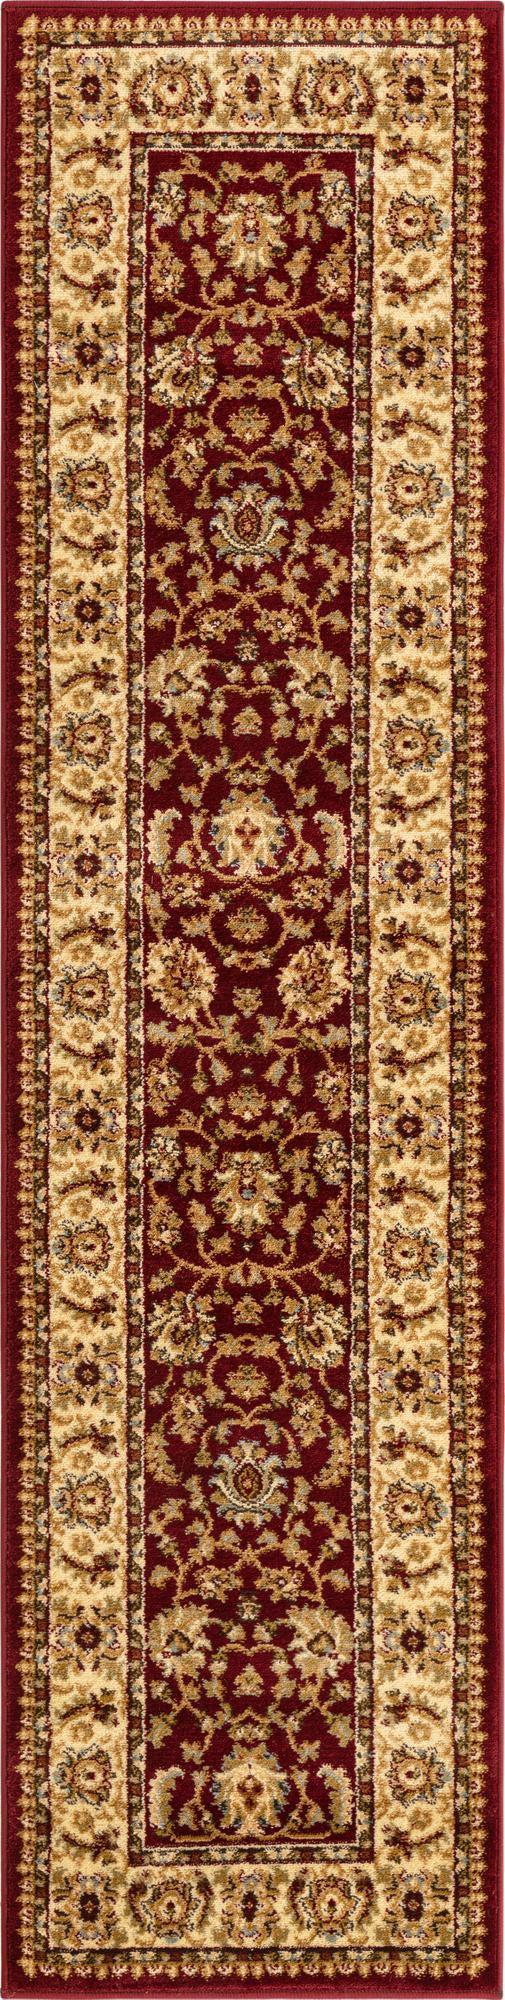 rugpal odyssey traditional area rug collection